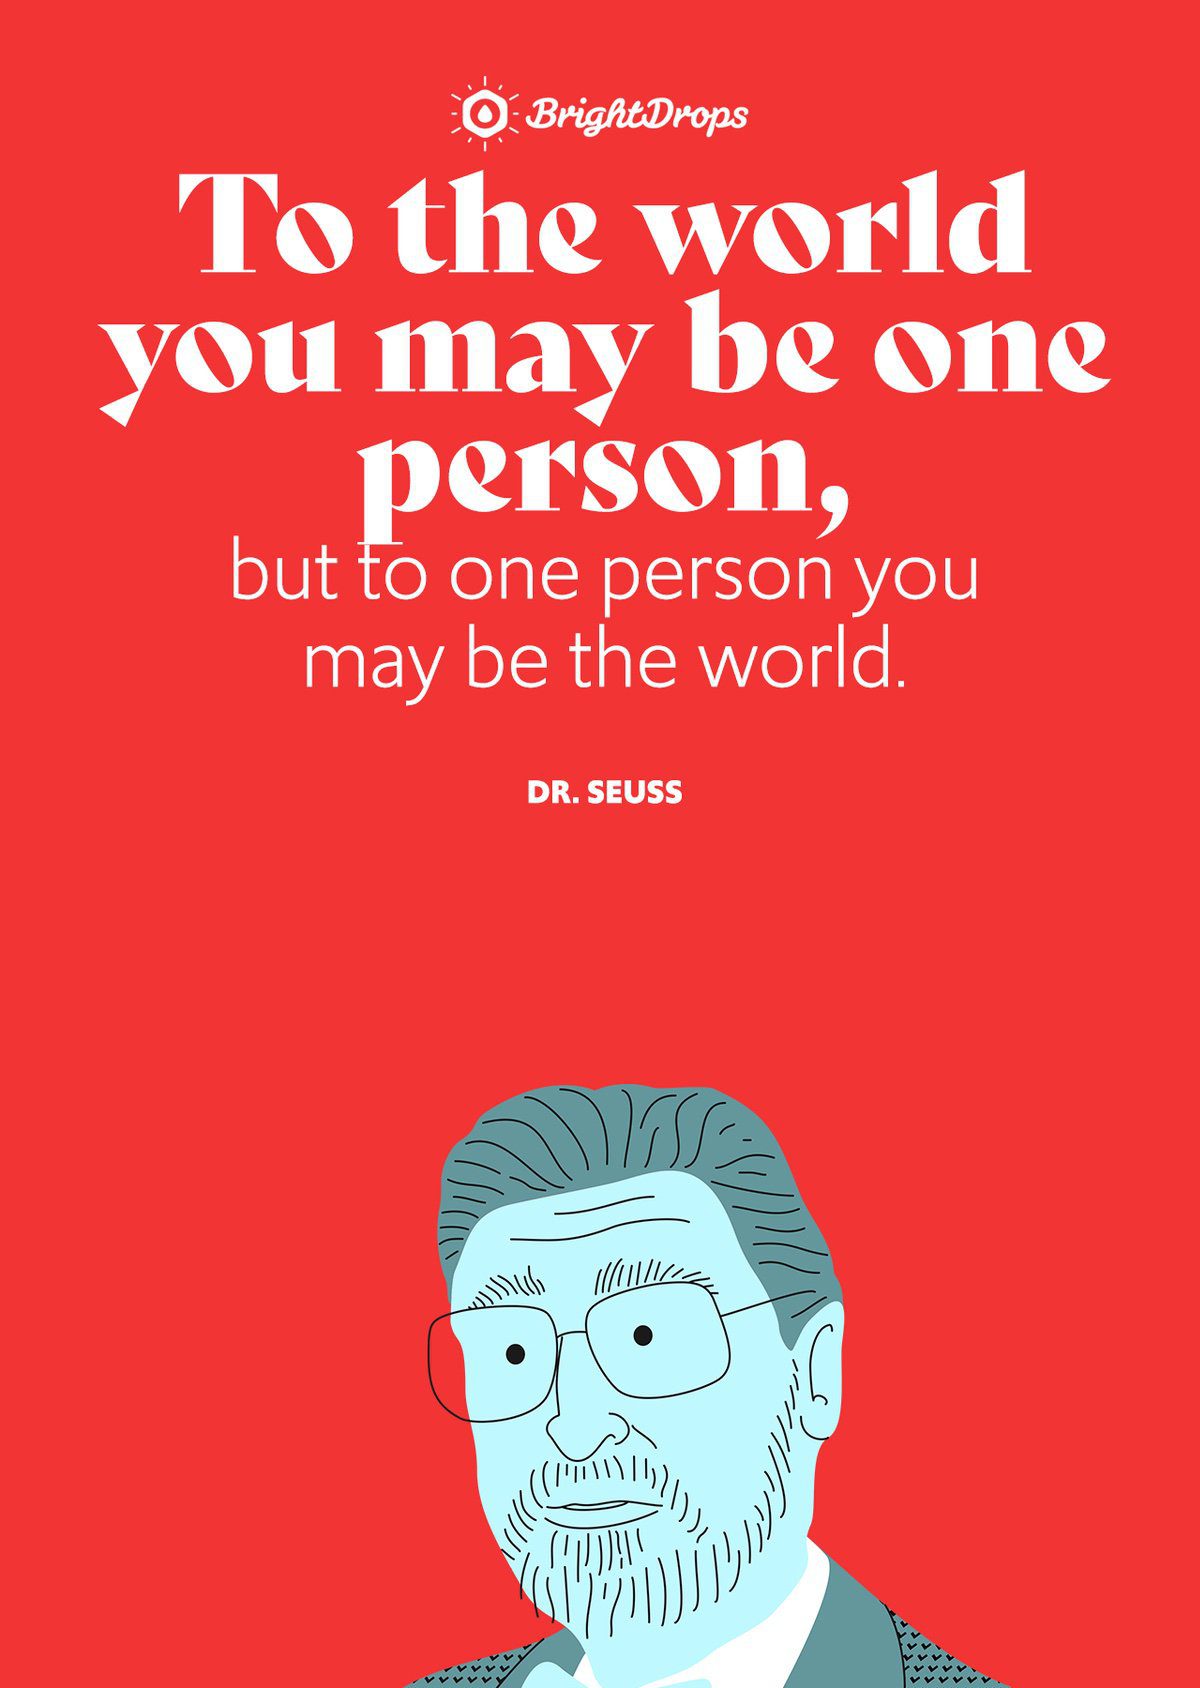 To the world you may be one person, but to one person you may be the world.